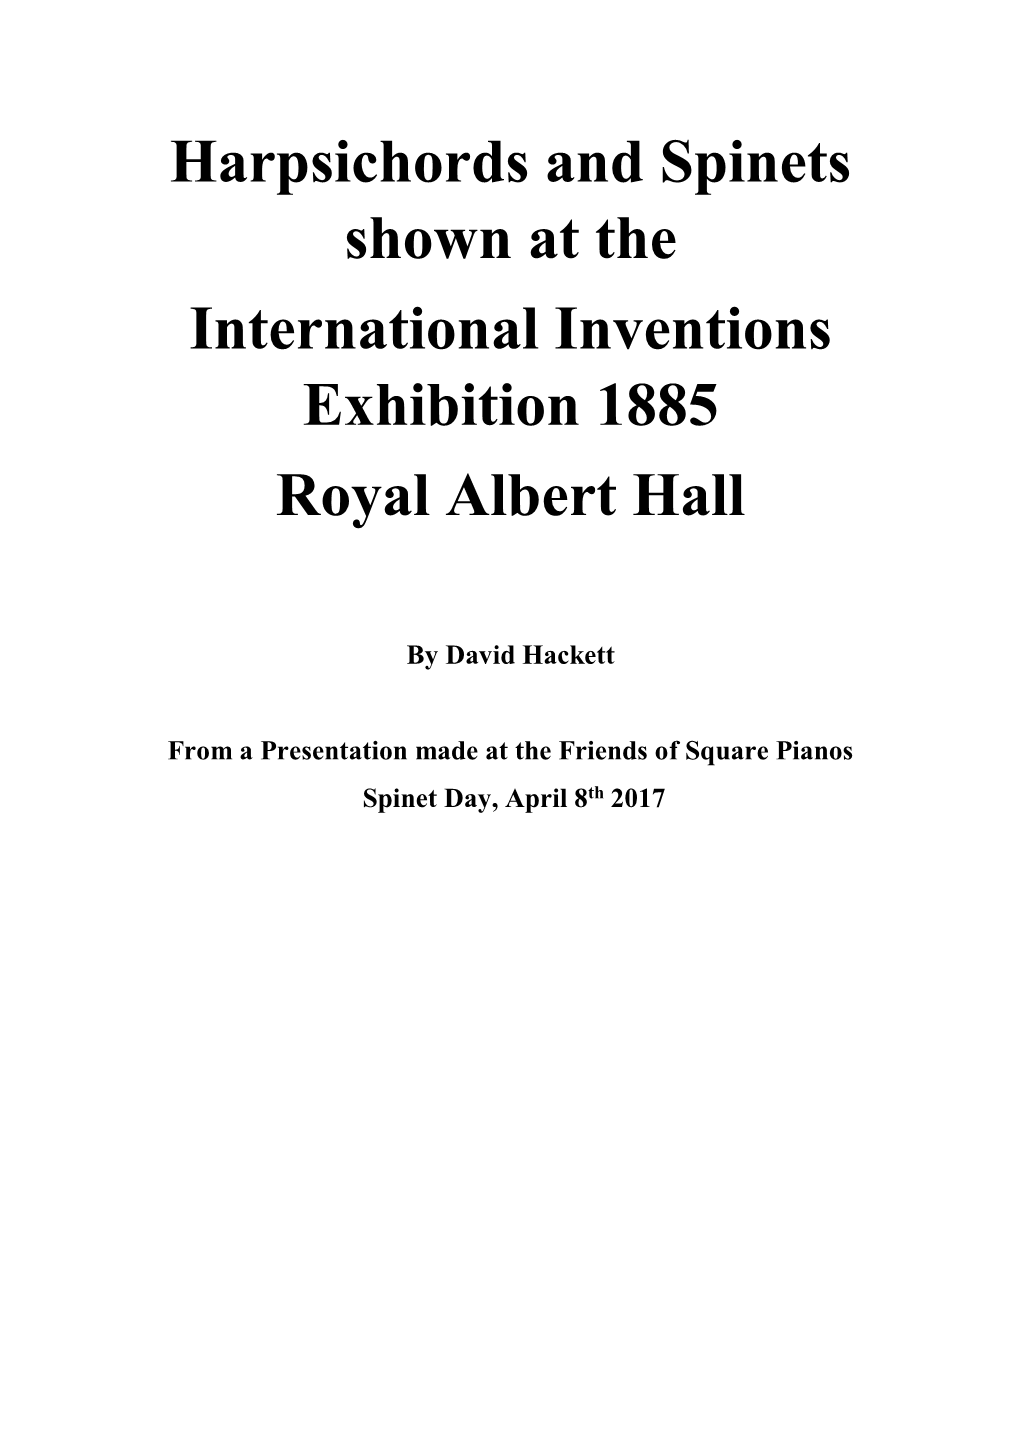 Harpsichords and Spinets Shown at the International Inventions Exhibition 1885 Royal Albert Hall